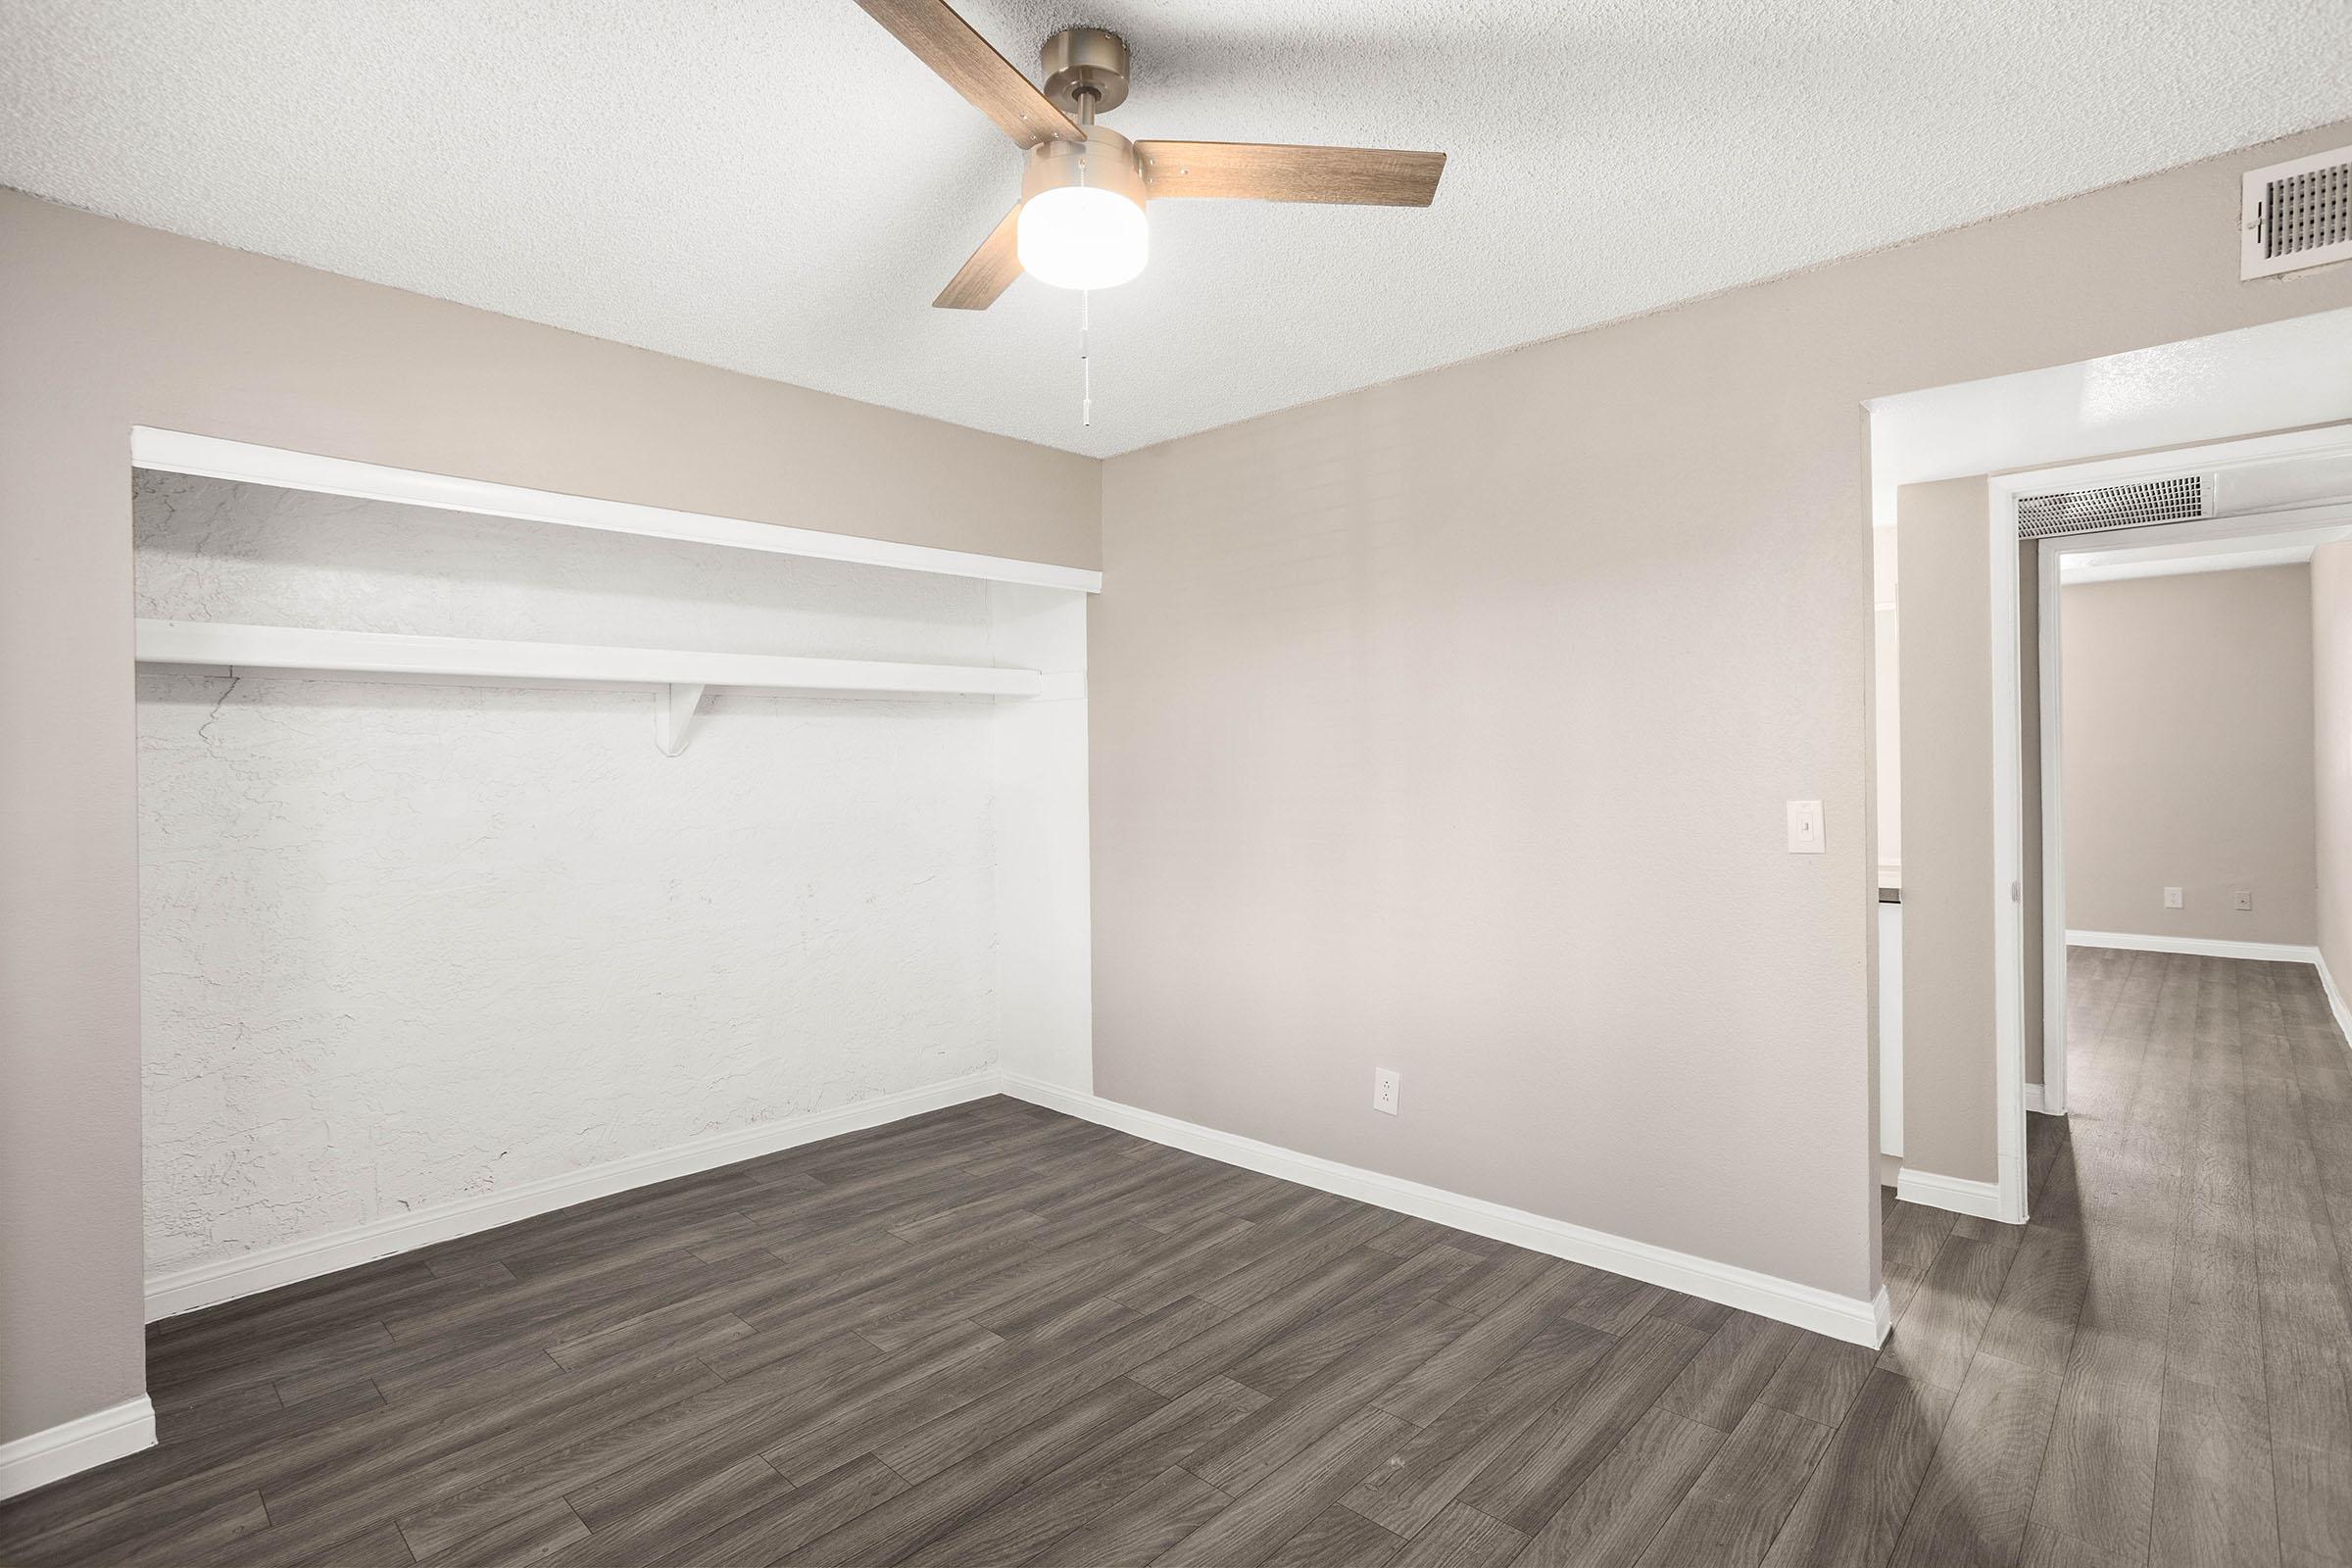 Large bedroom with ceiling fan, built in closet, and vinyl plank flooring